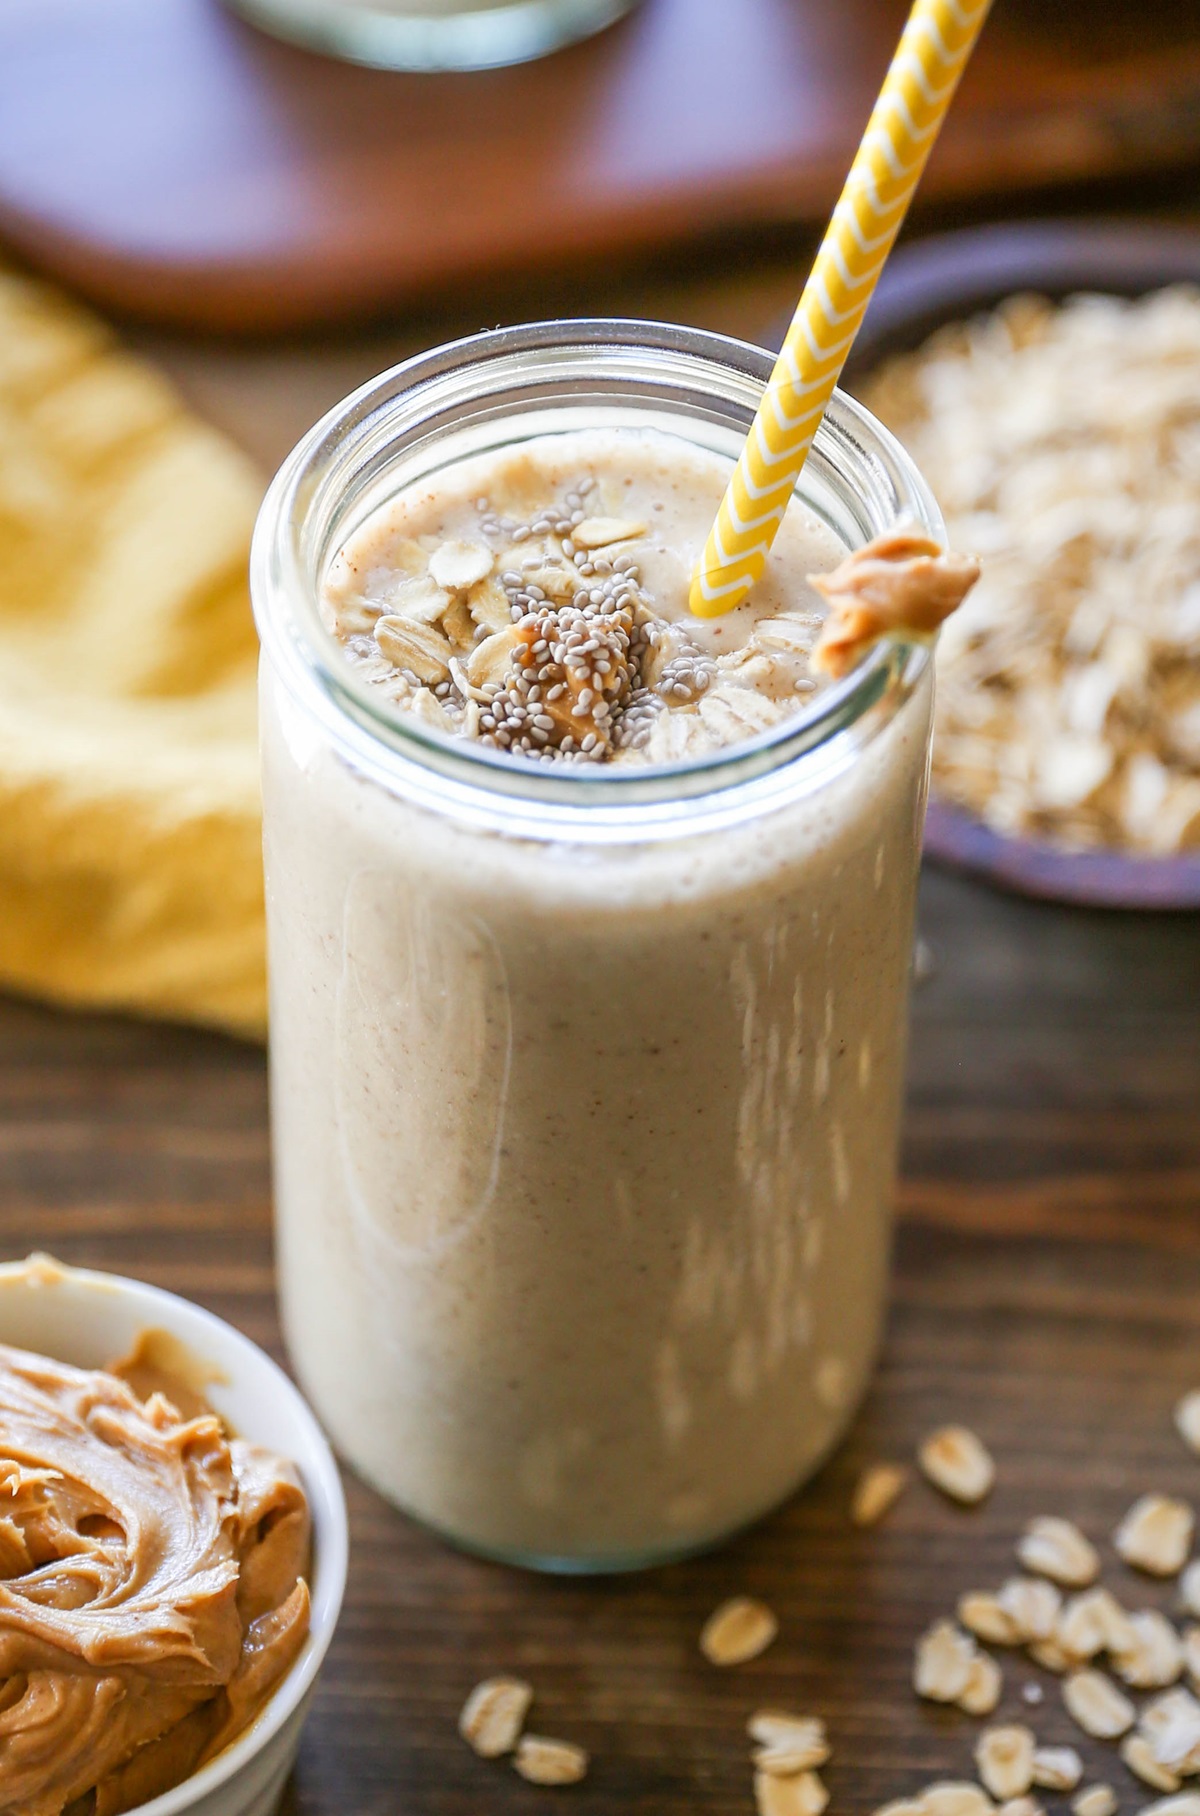 Banana Bread Oat Protein Smoothie in a glass with a yellow striped straw, ready to drink. Peanut butter, oats, and bananas in the background.